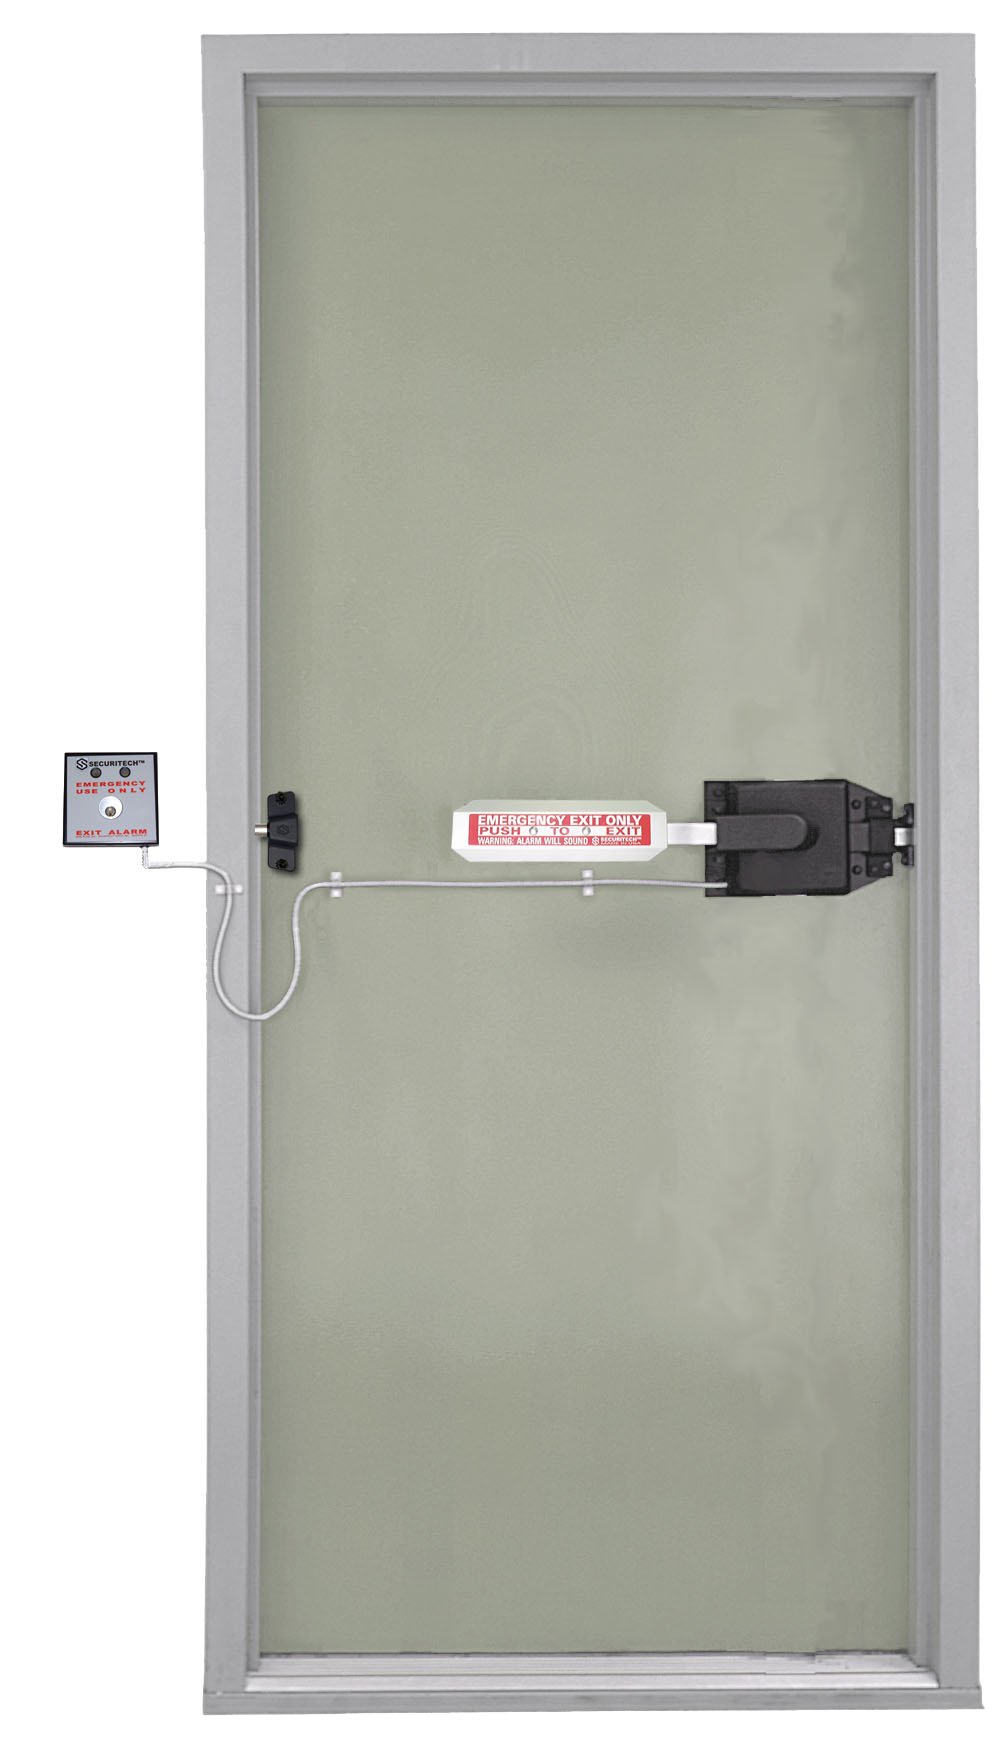 SERPENT - Exit Locking System Which Deadbolts Both Sides Of The Door